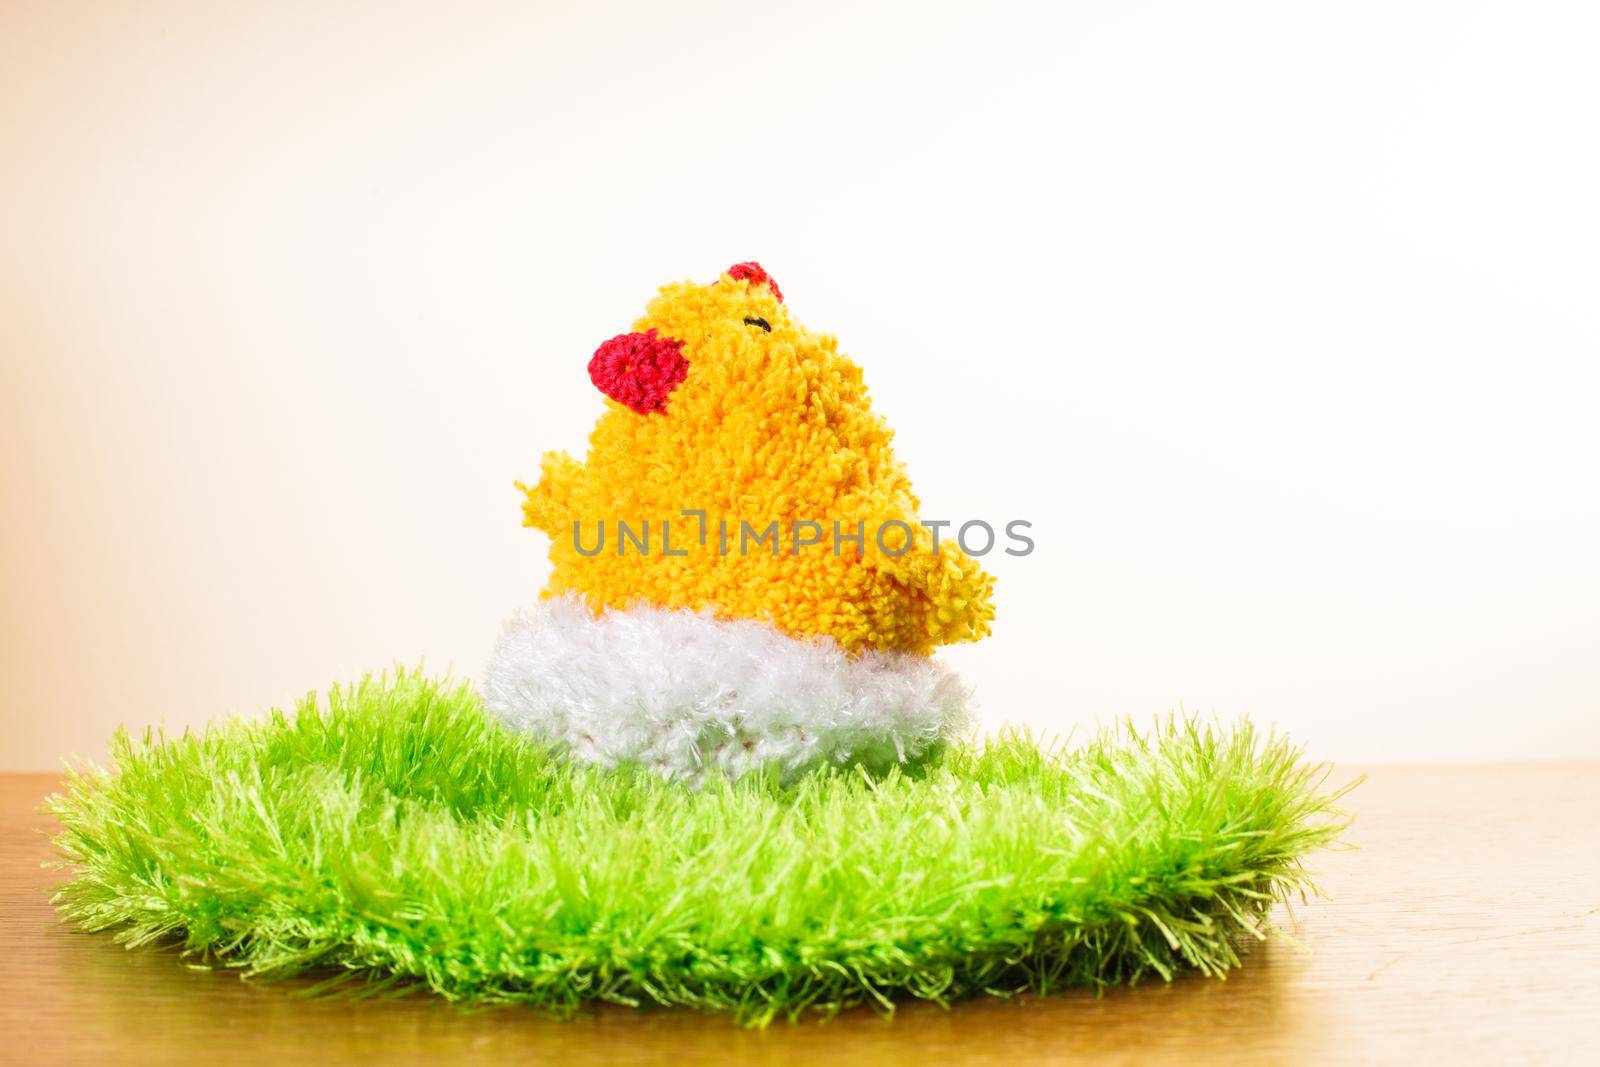 Crochet chicken with eggs in the nest. Easter decorations